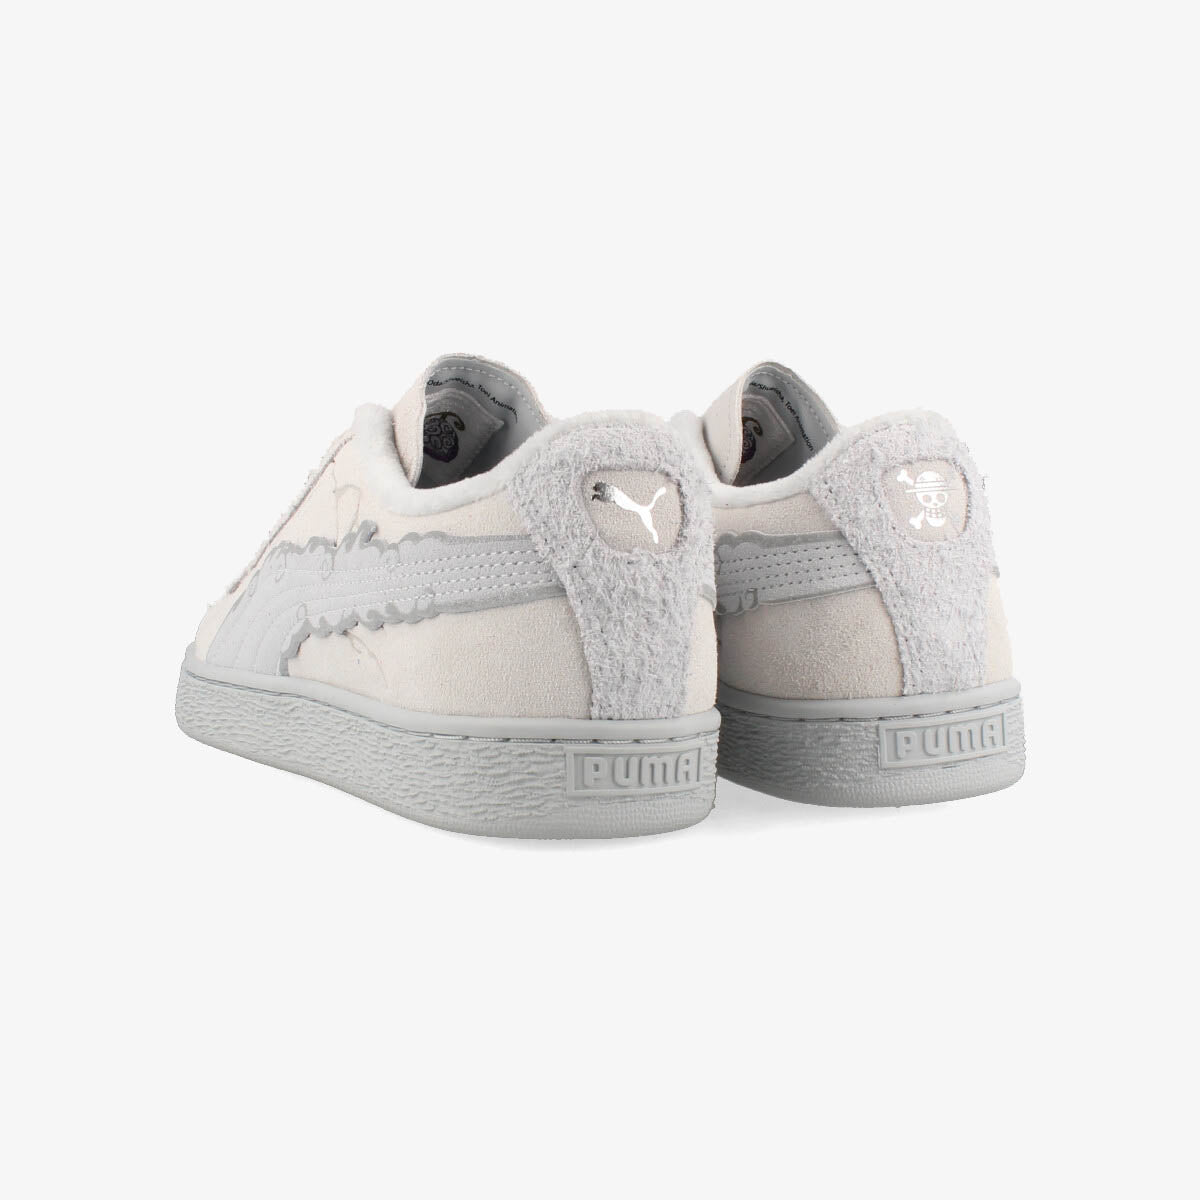 PUMA SUEDE 3 ONE PIECE MONKEY D. LUFFY FEATHER GRAY/COOL LIGHT ...